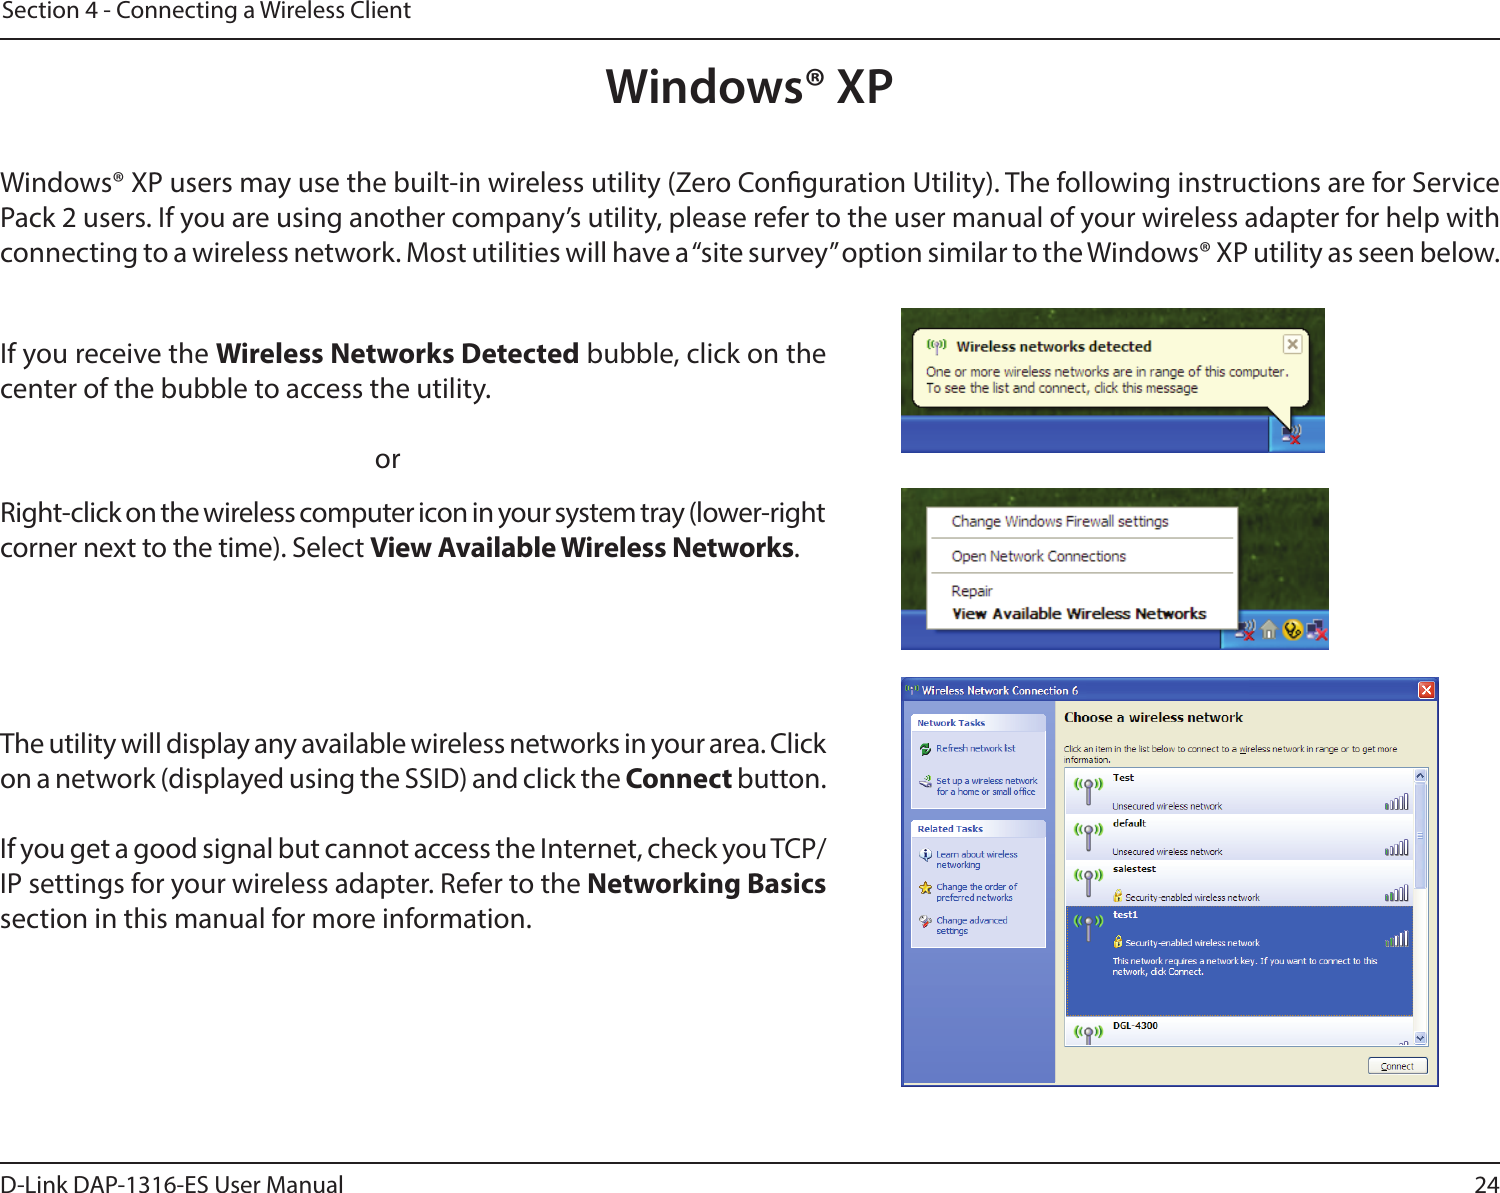 24D-Link DAP-1316-ES User ManualSection 4 - Connecting a Wireless ClientWindows® XPWindows® XP users may use the built-in wireless utility (Zero Conguration Utility). The following instructions are for Service Pack 2 users. If you are using another company’s utility, please refer to the user manual of your wireless adapter for help with connecting to a wireless network. Most utilities will have a “site survey” option similar to the Windows® XP utility as seen below.Right-click on the wireless computer icon in your system tray (lower-right corner next to the time). Select View Available Wireless Networks.If you receive the Wireless Networks Detected bubble, click on the center of the bubble to access the utility.     orThe utility will display any available wireless networks in your area. Click on a network (displayed using the SSID) and click the Connect button.If you get a good signal but cannot access the Internet, check you TCP/IP settings for your wireless adapter. Refer to the Networking Basics section in this manual for more information.